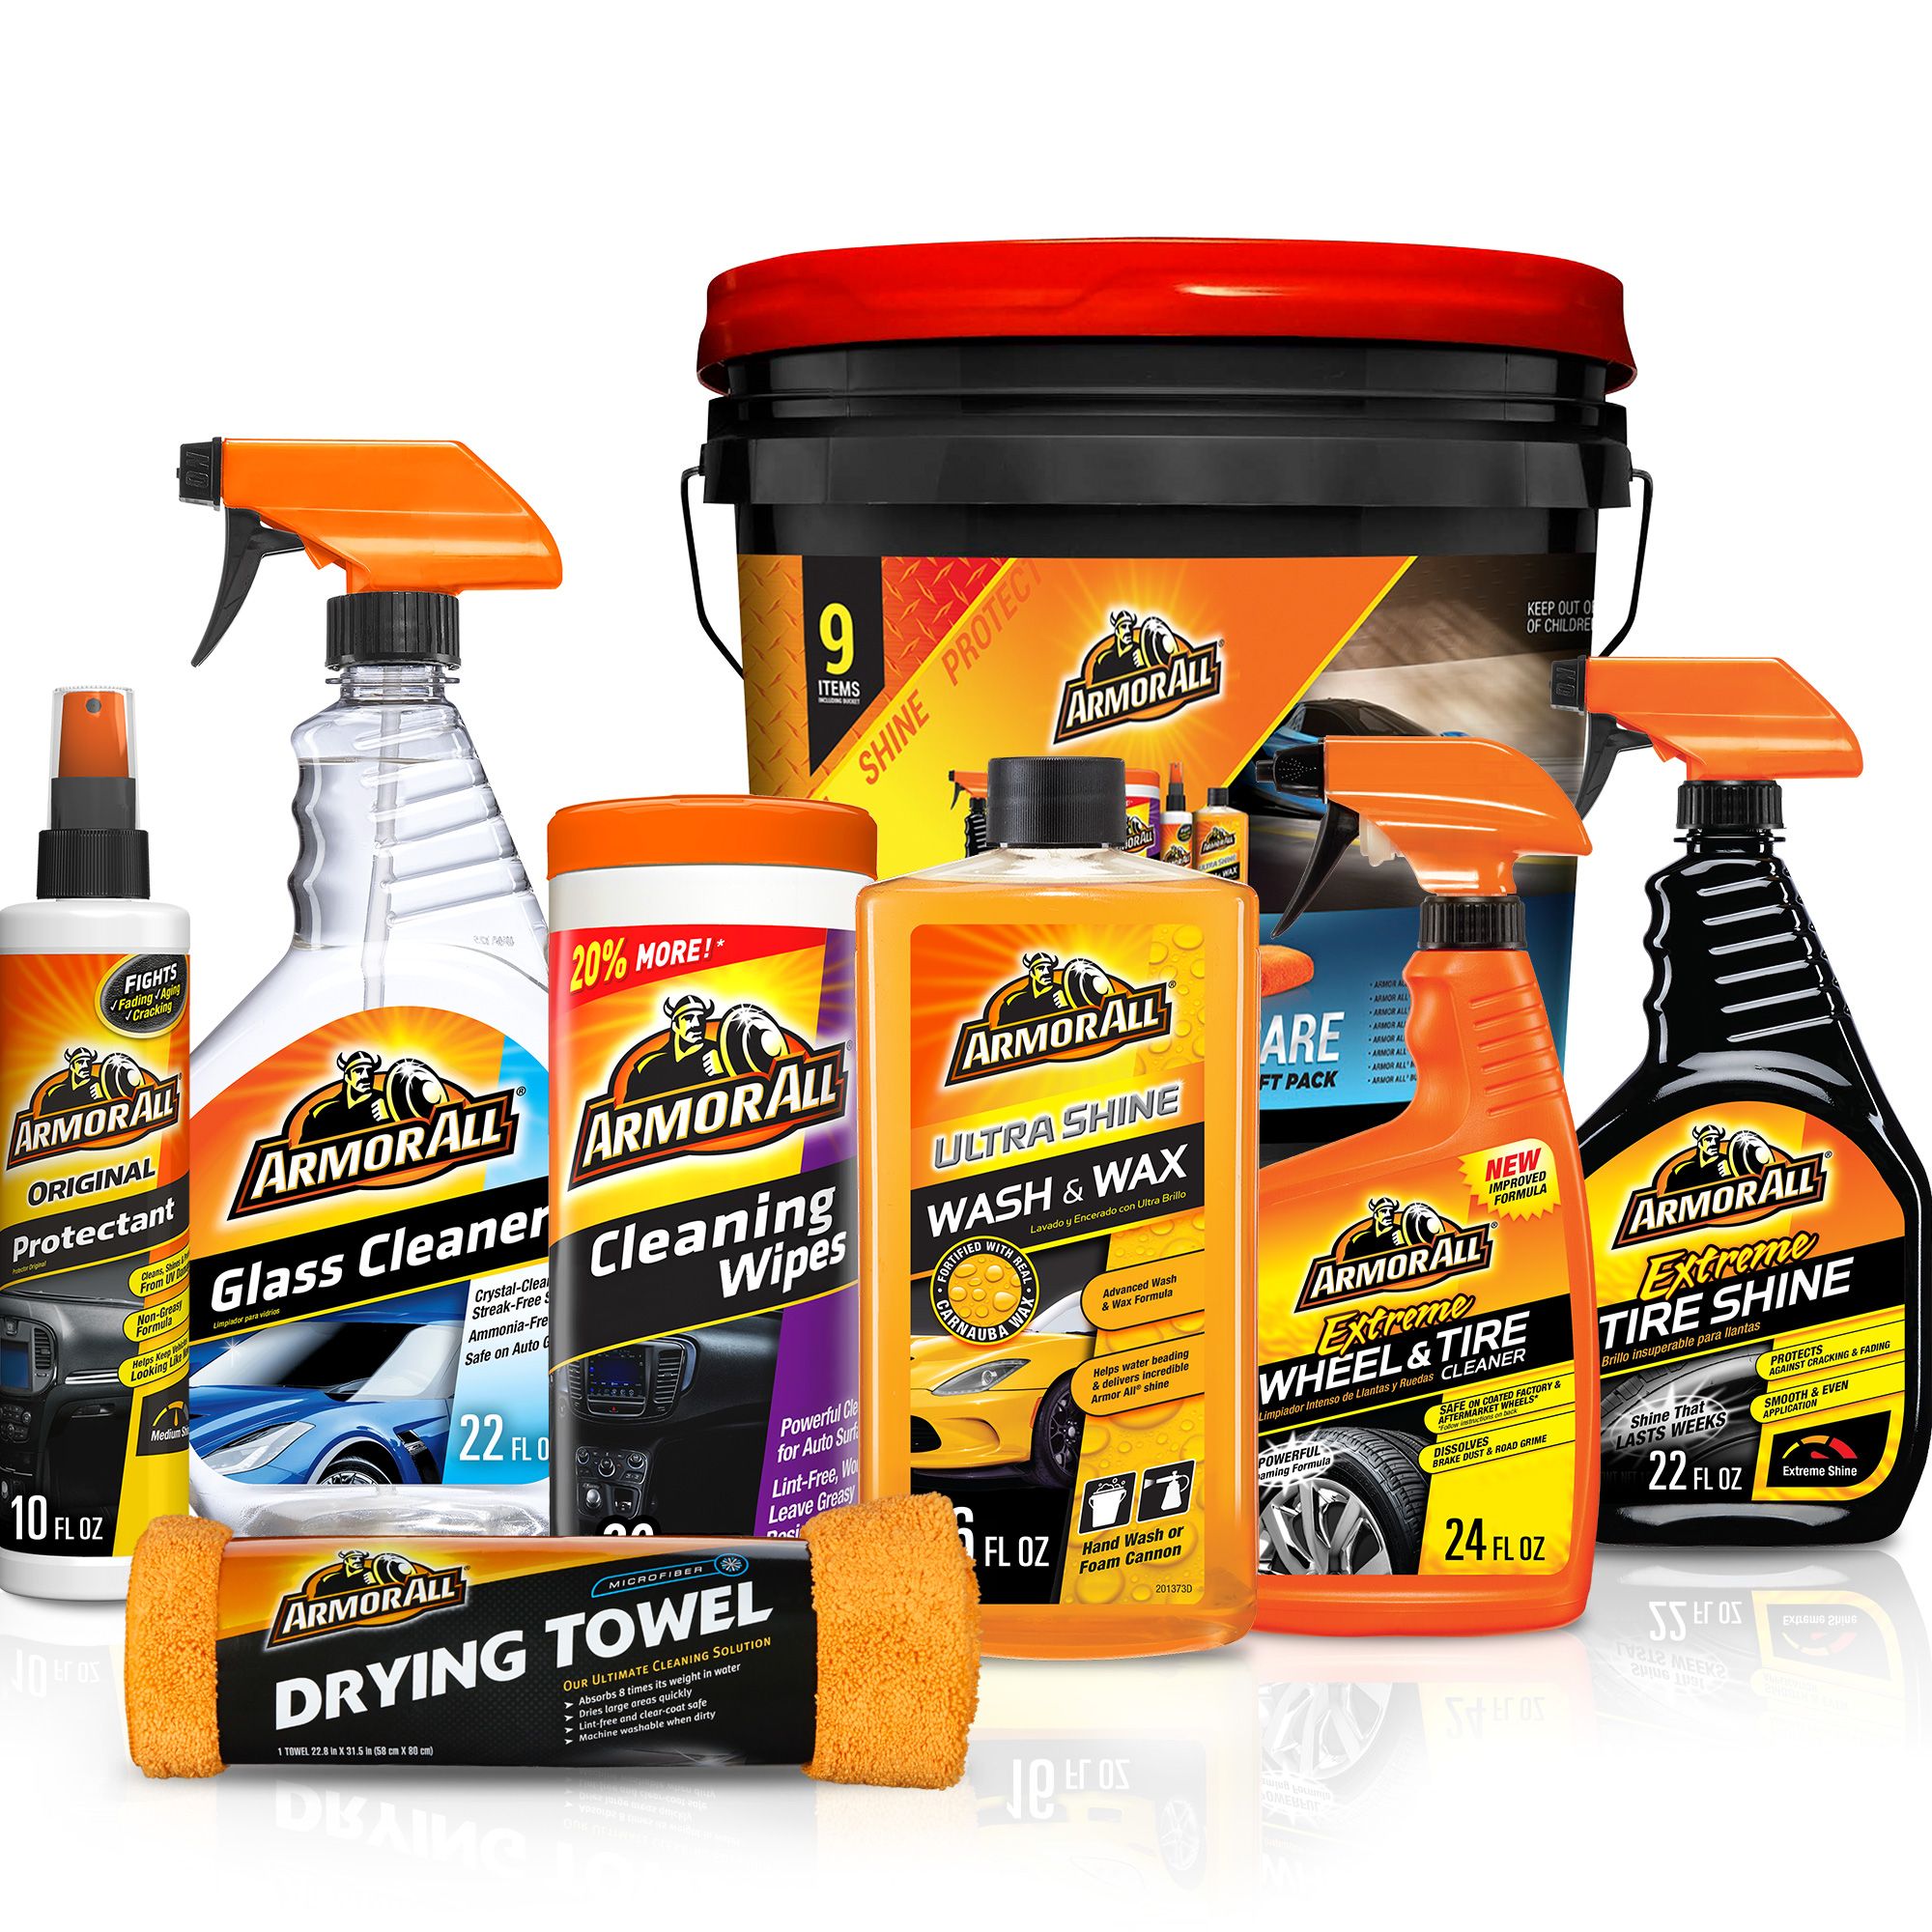 This Armor All 9-piece car care kit is just $19.88 at Walmart right now